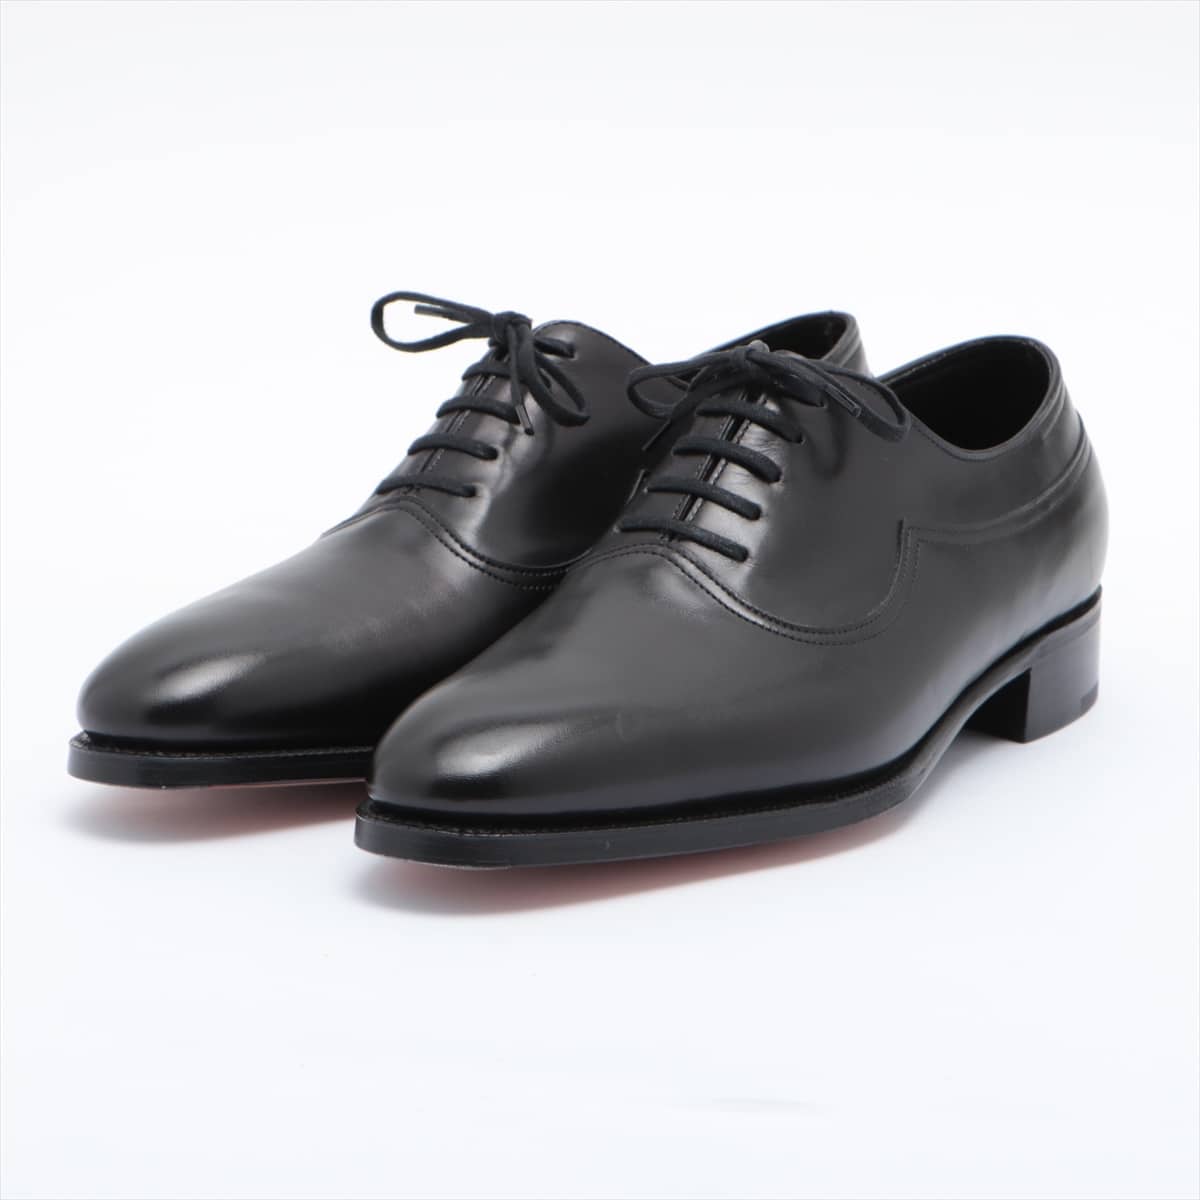 John Lobb Leather Leather shoes 7.5 Men's Black Comes with genuine shoe keeper